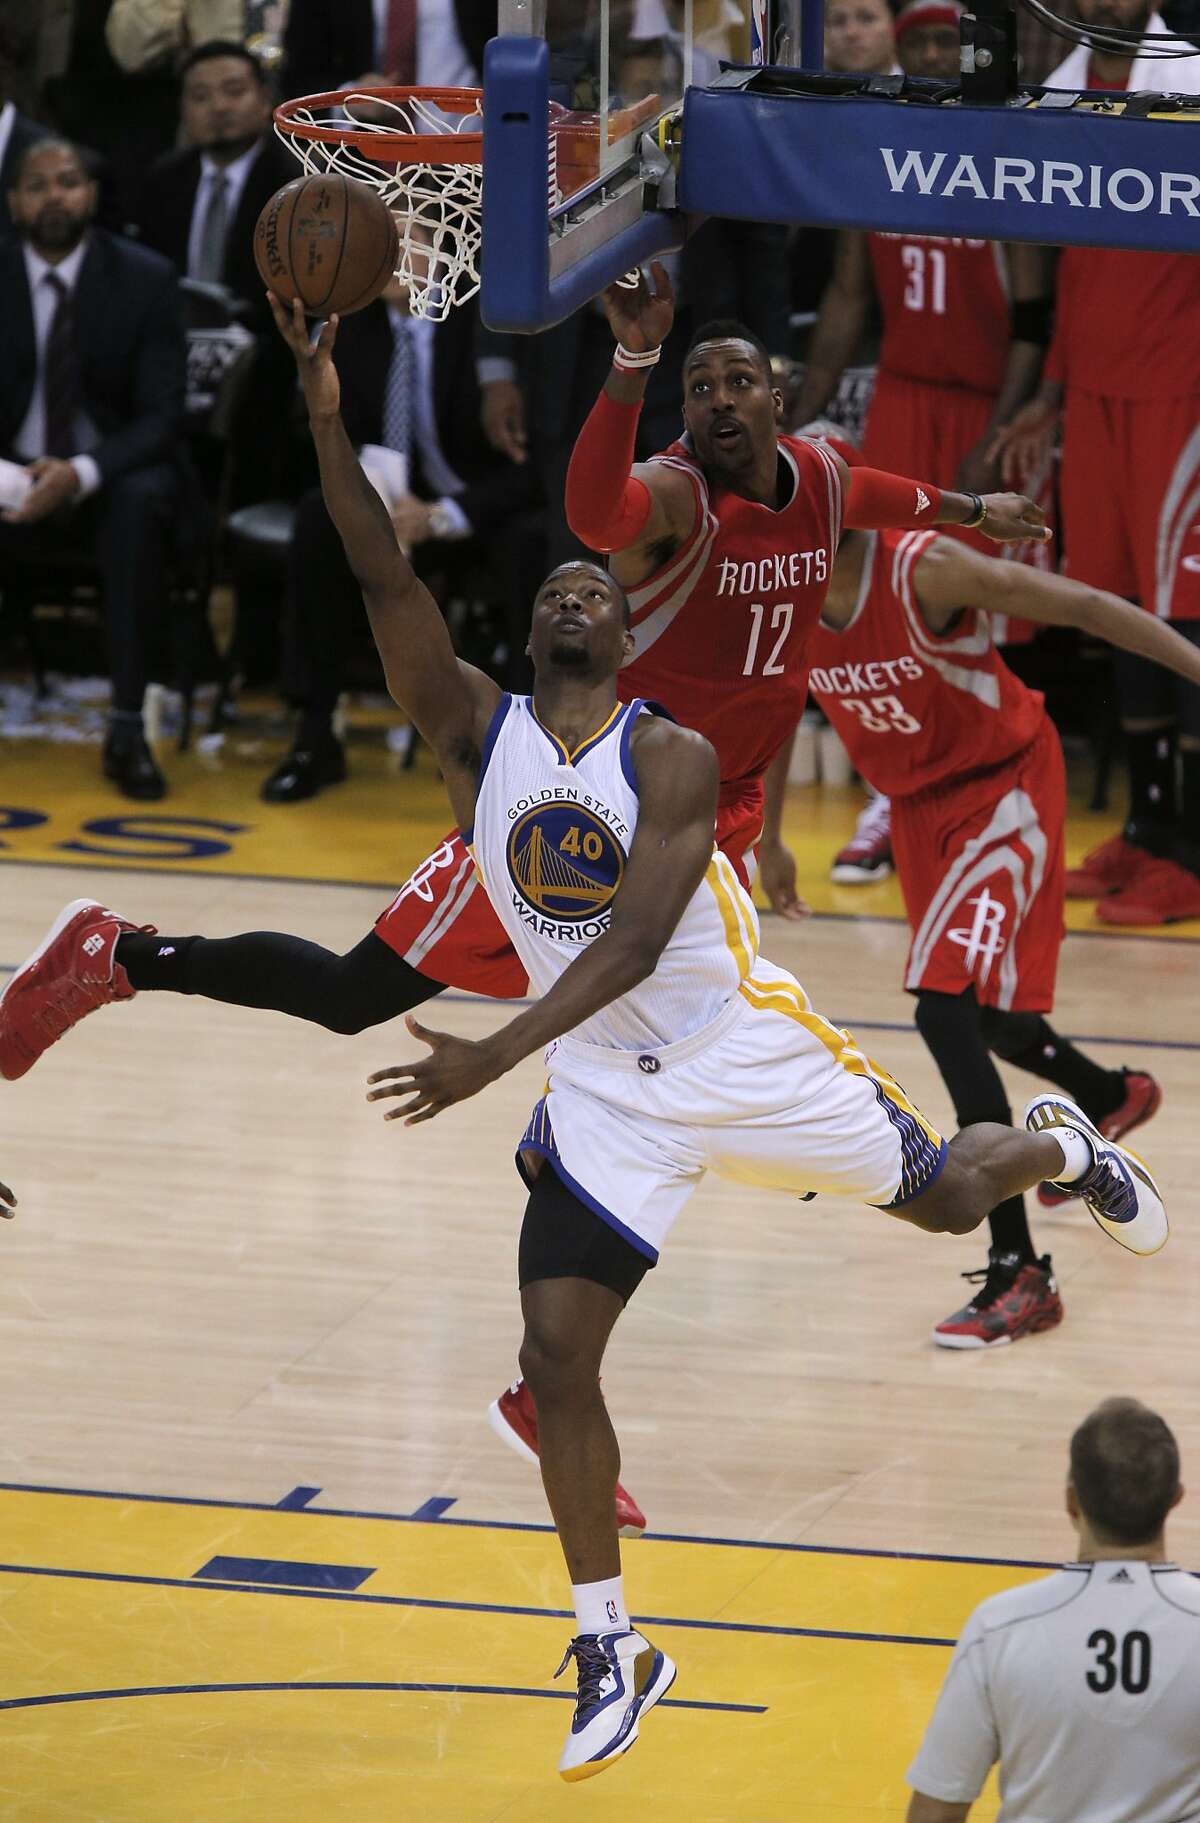 Harrison Barnes (40) tries to shoot in the fourth quarter but misses the Warriors' last shot as Golden State played the Houston Rockets in Game 2 of the Western Conference finals at Oracle Arena in Oakland, Calif., on Thursday, May 21, 2015. The Warriors defeated the Rockets 99-98.